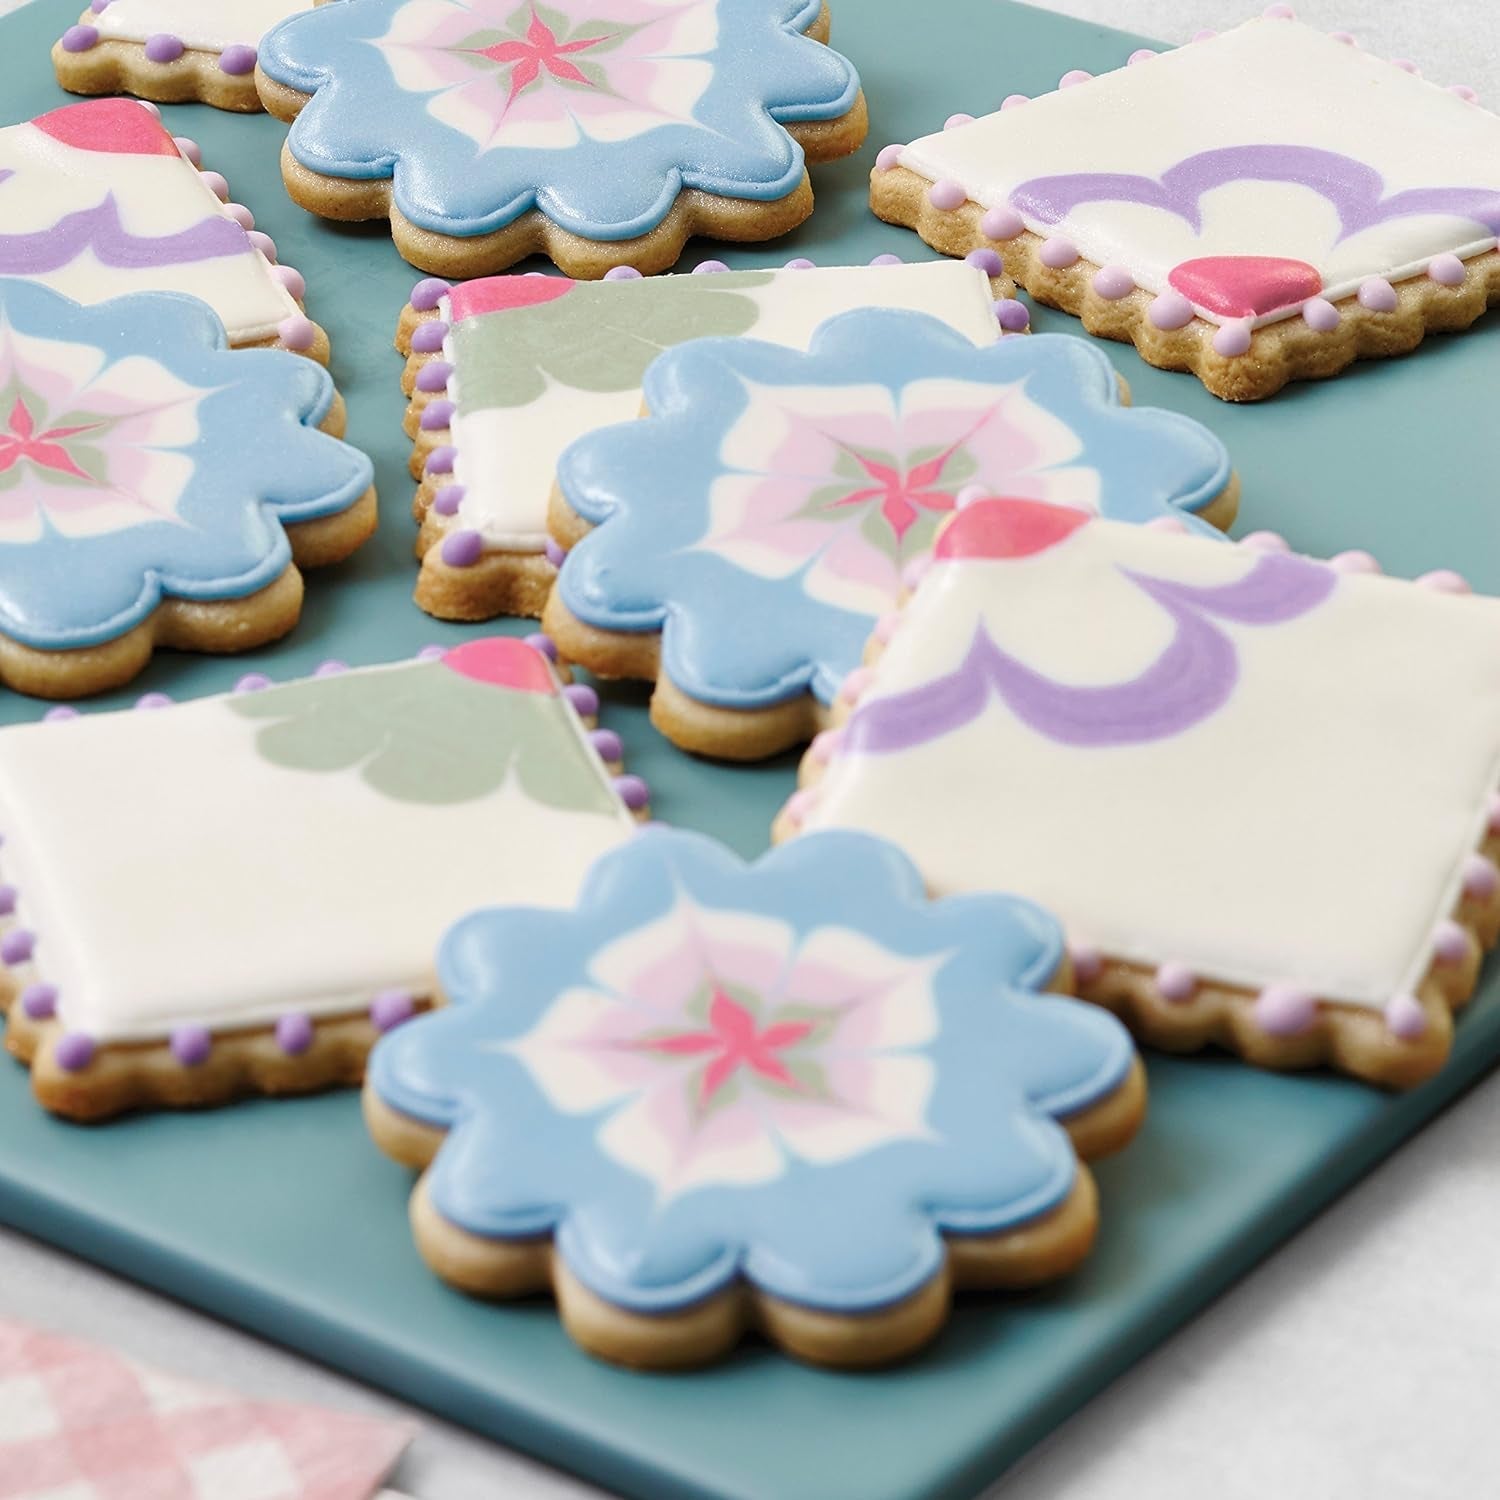 "I Taught Myself to Decorate Cookies" Cookie Decorating Kit with How-To Booklet